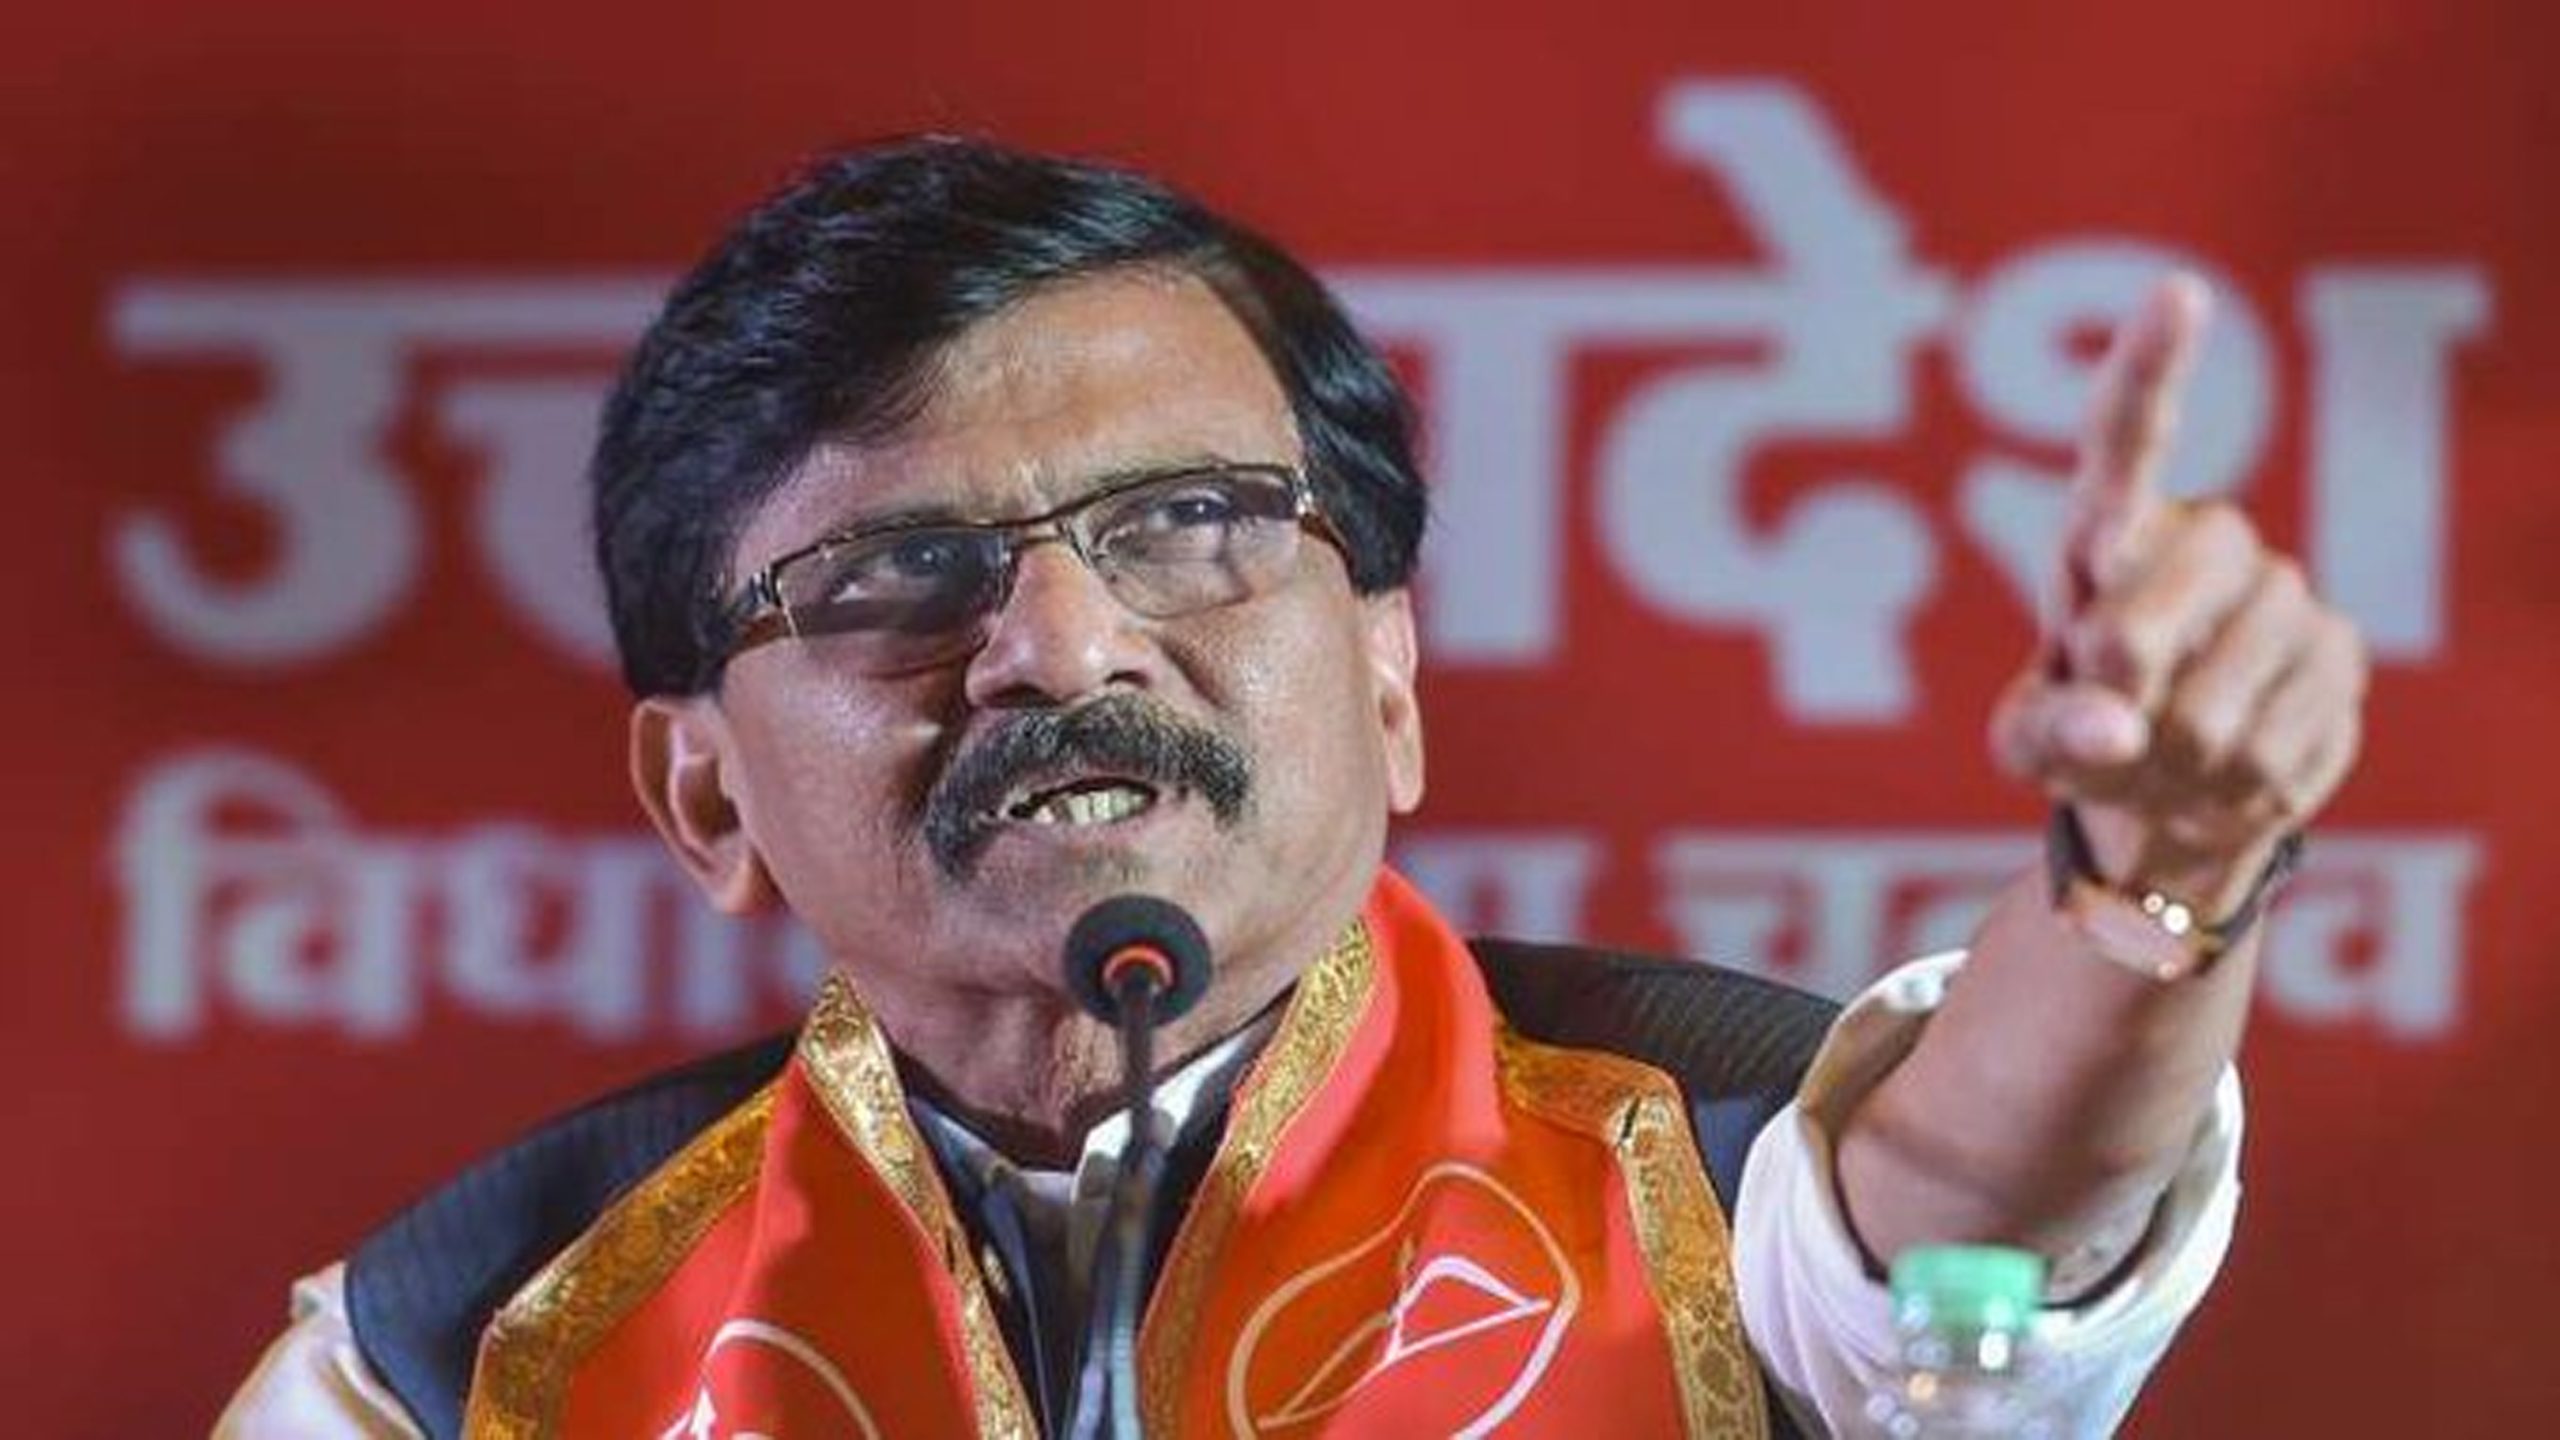 Article 370 abrogation only on paper: Sanjay Raut